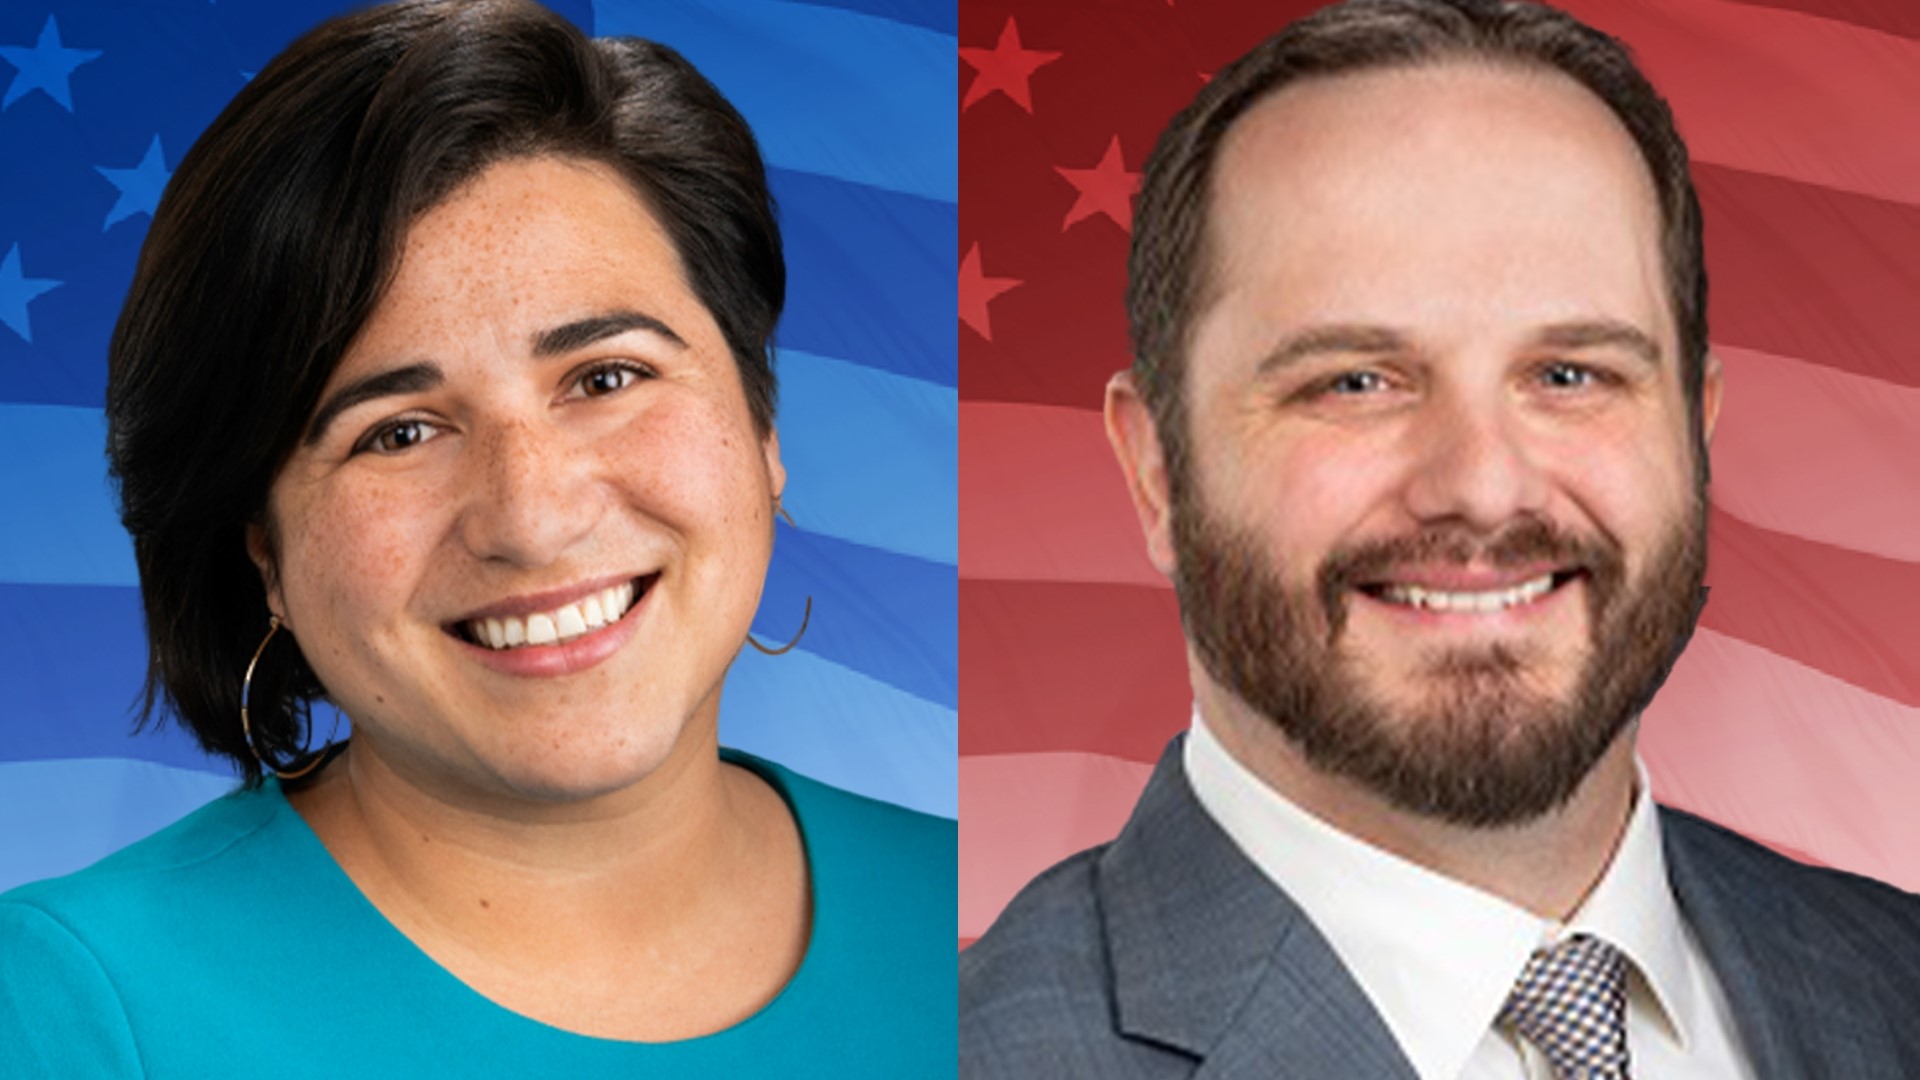 Democratic incumbent Sen. Emily Randall is facing a challenge from Republican Rep. Jesse Young in the most expensive legislative race in the state.